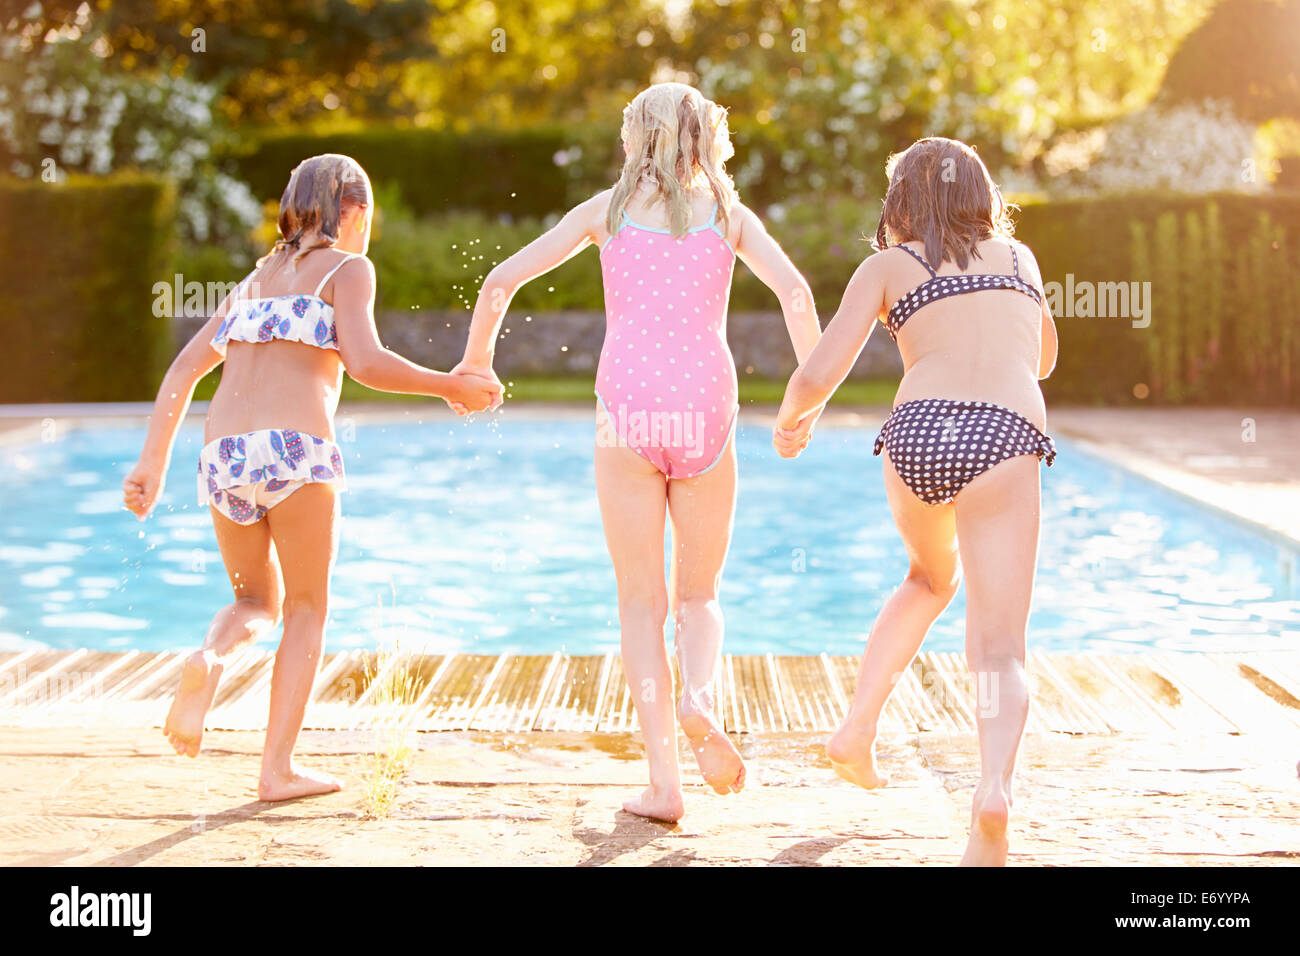 Group Of Girls Jumping Into Outdoor Swimming Pool Stock Photo